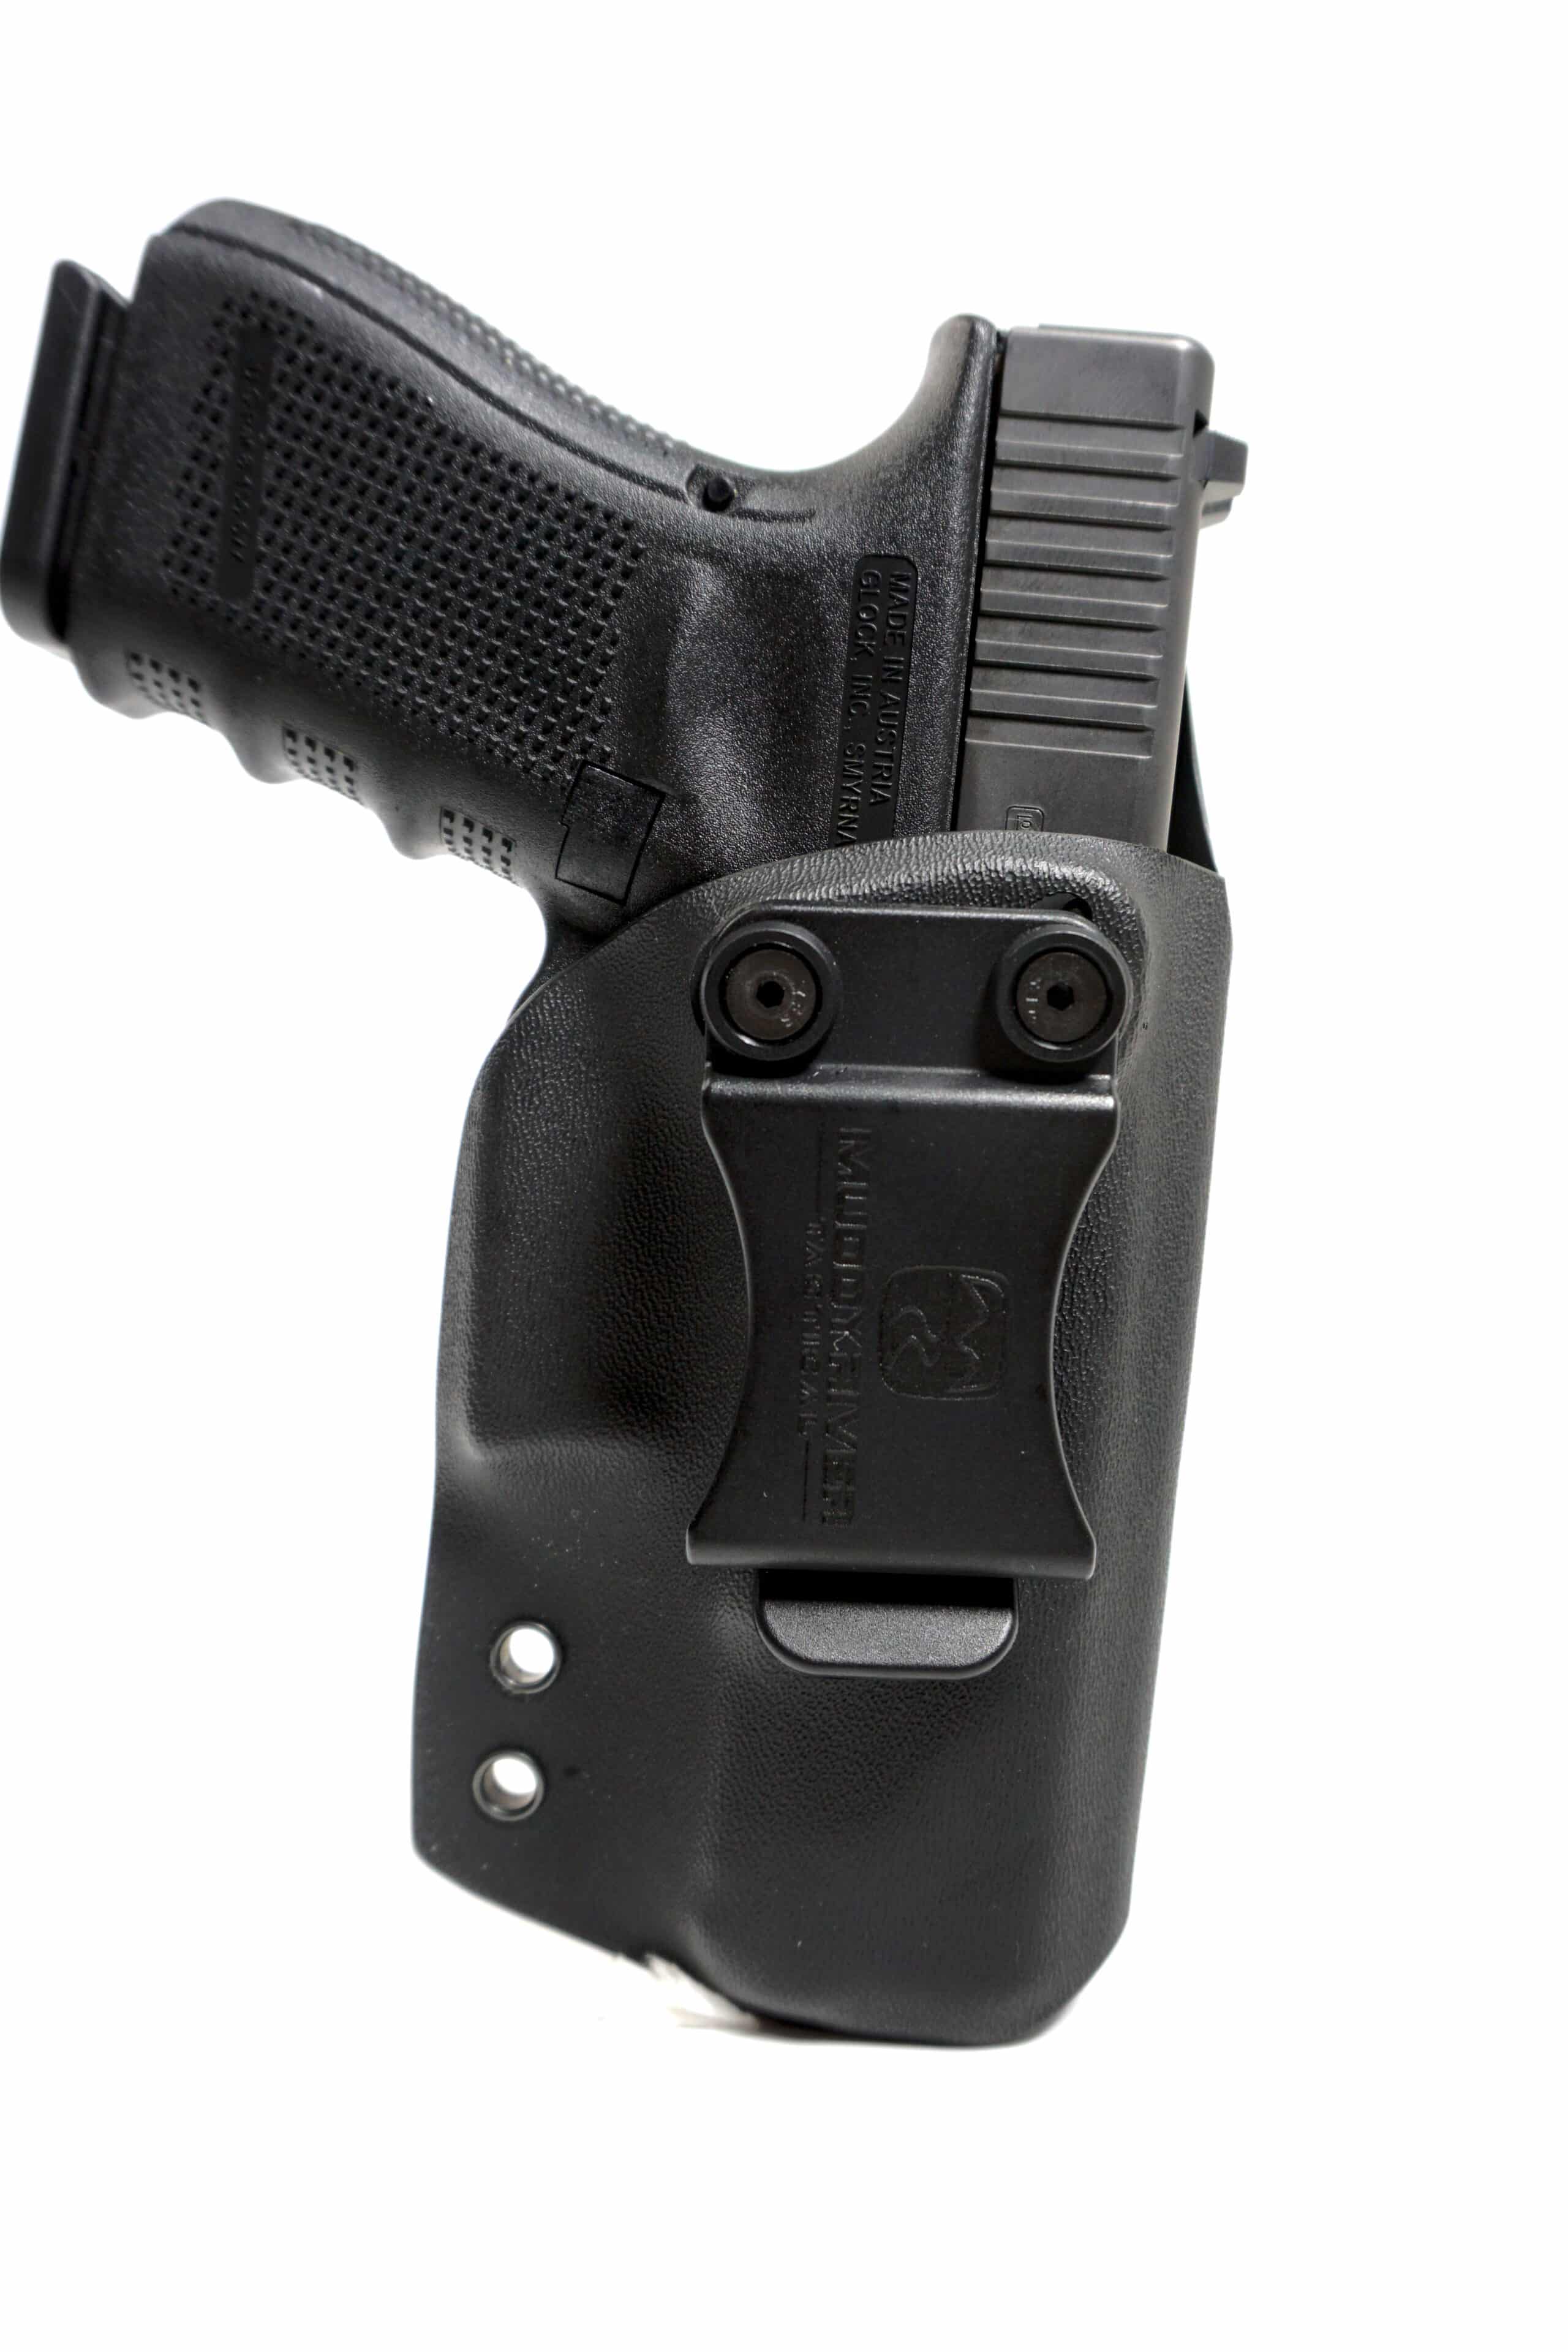 BERSA THUNDER 380 CC CONCEAL CARRY COMFORT HOLSTER BY ACE CASE NEW! USA 